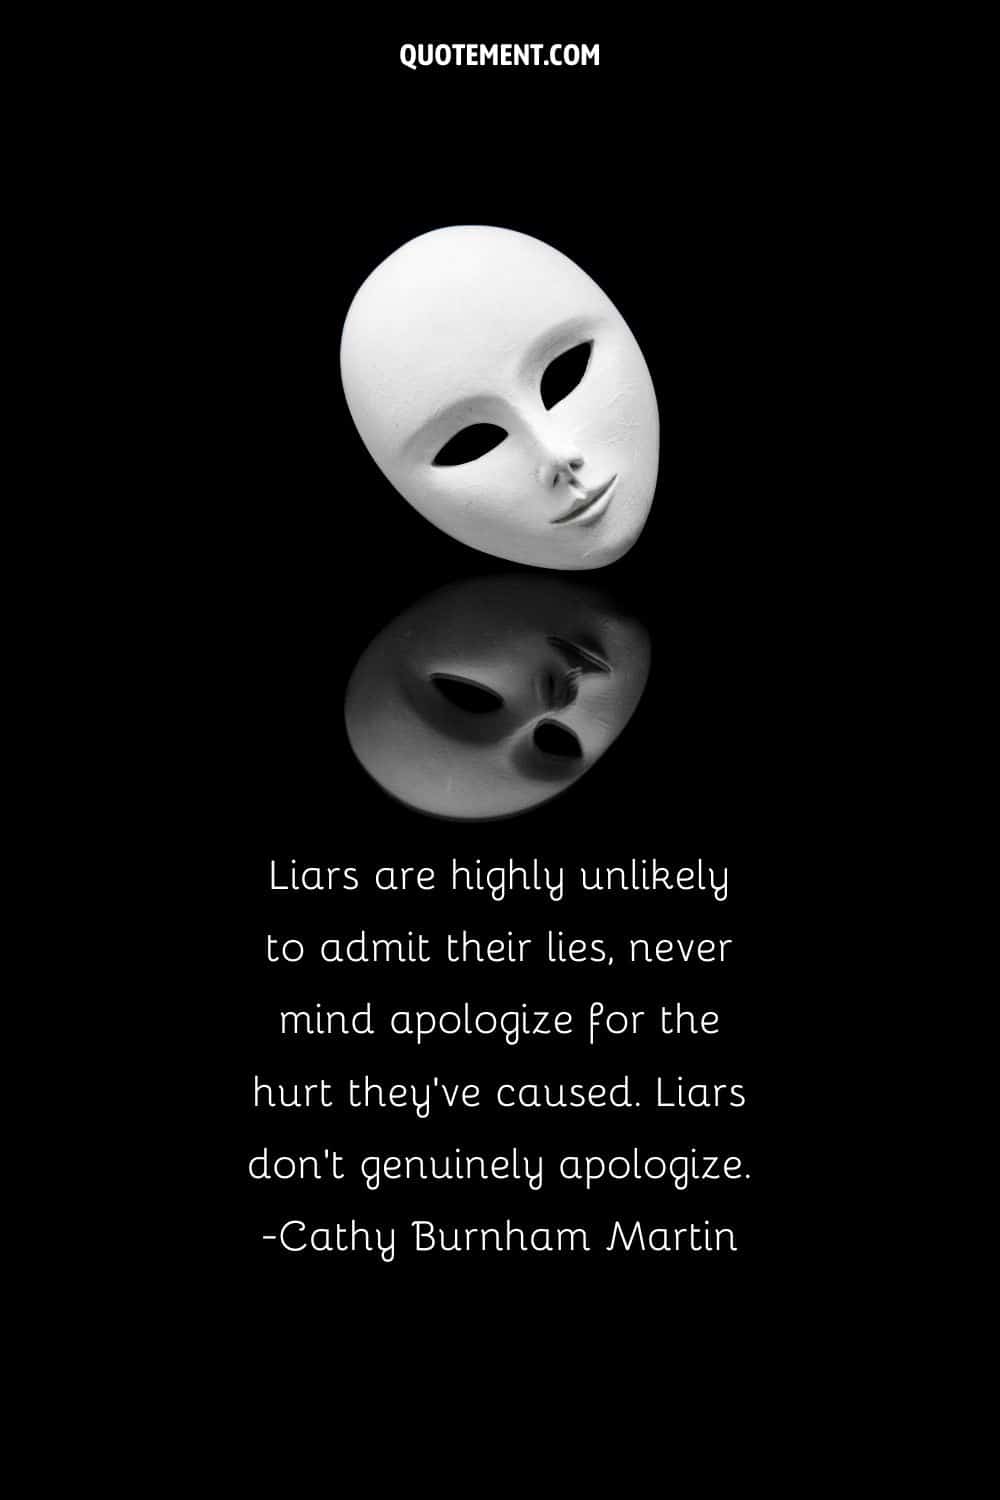 Liars are highly unlikely to admit their lies, never mind apologize for the hurt they’ve caused